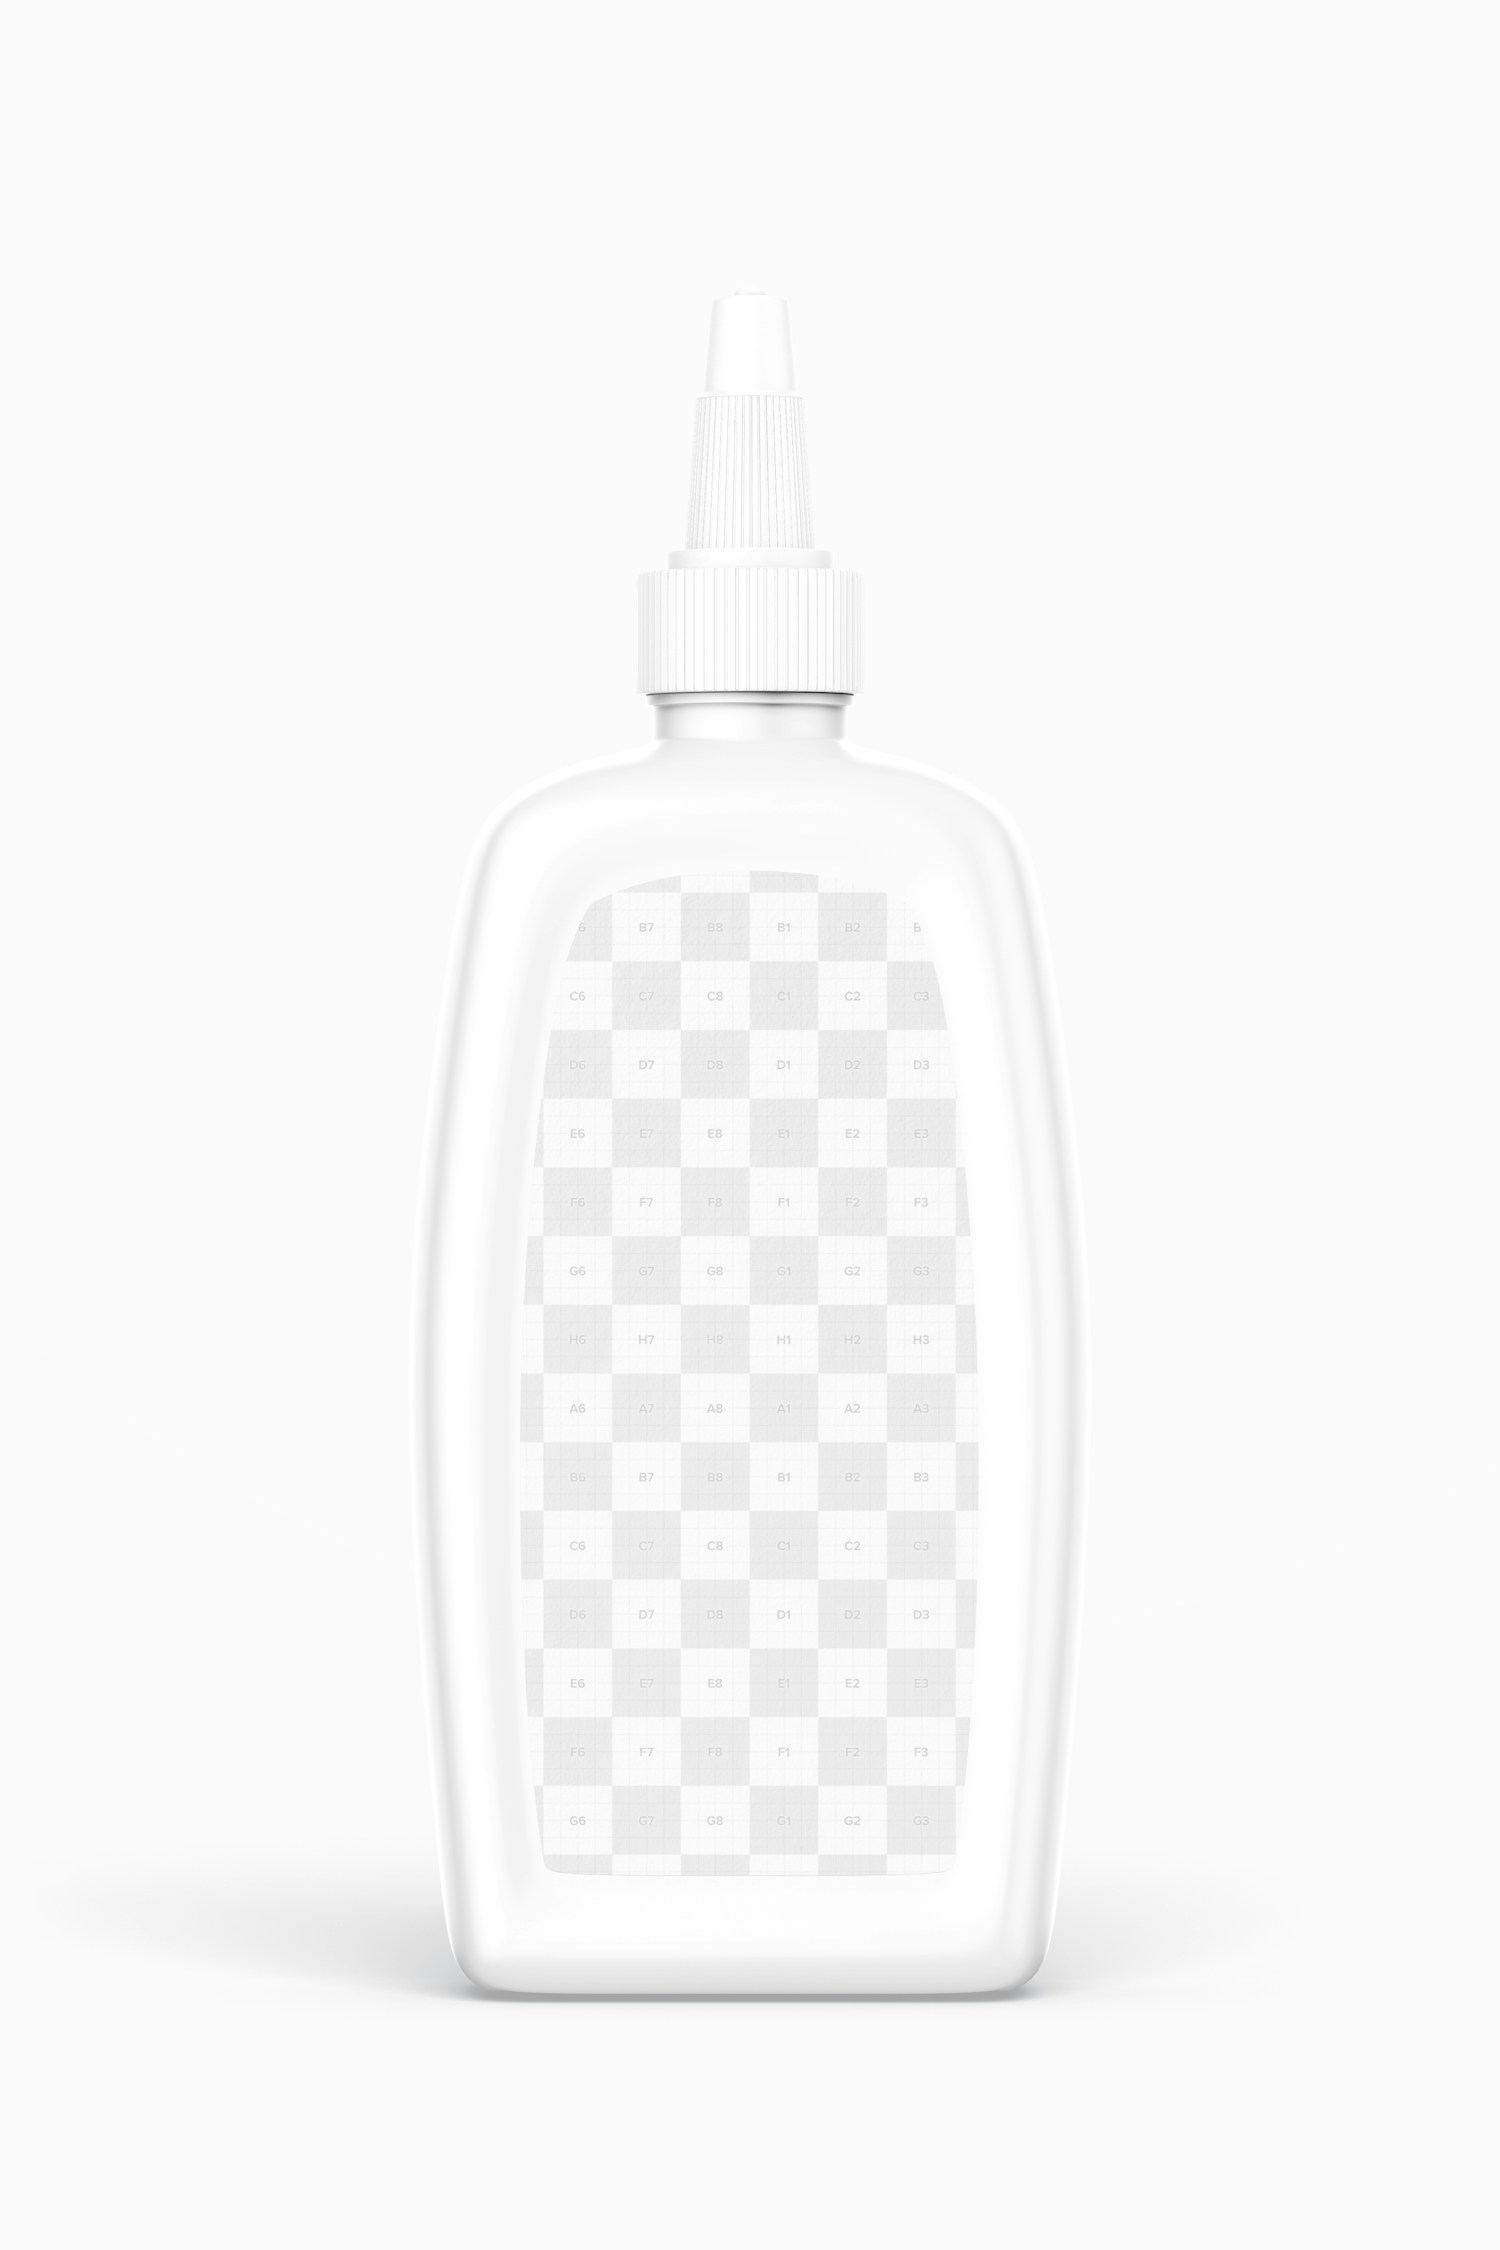 1.8 oz Tattoo Ink Bottle Mockup, Front View